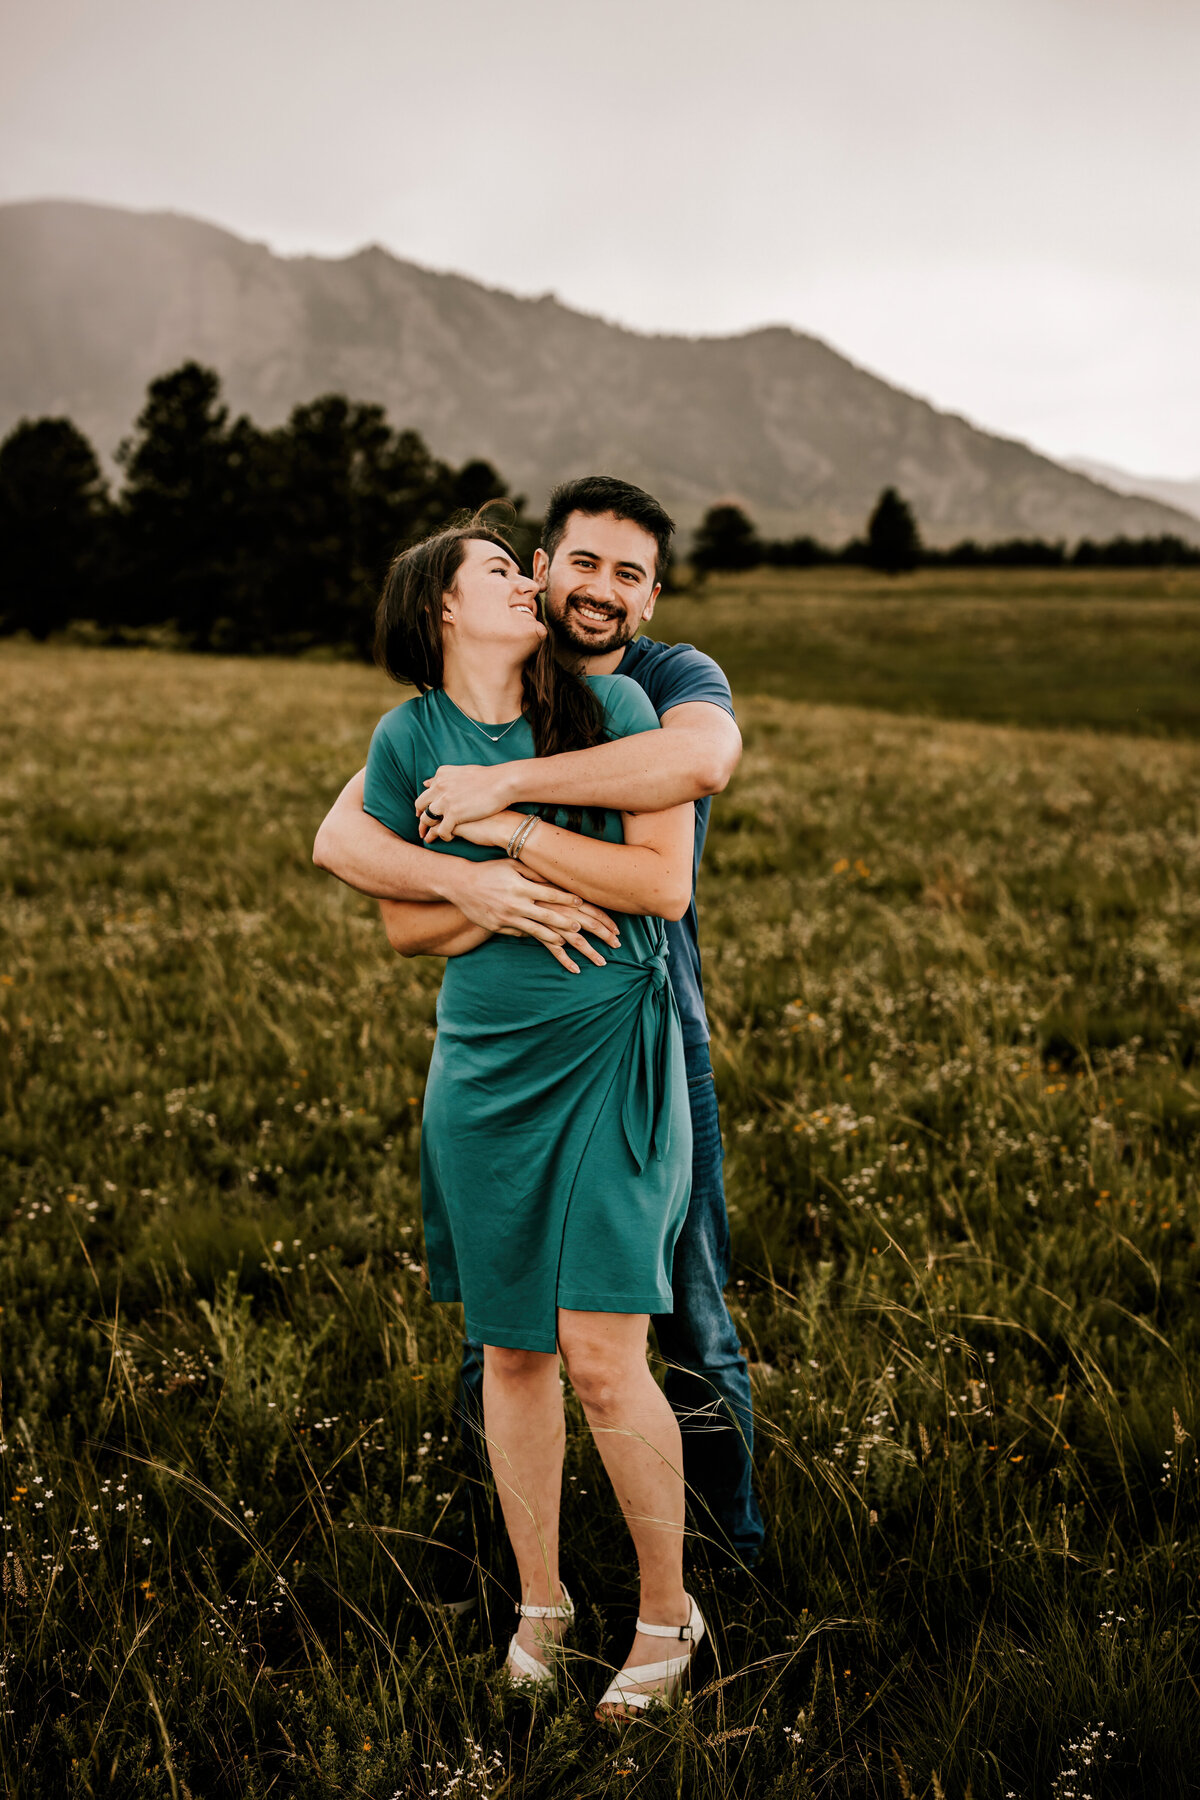 Colorado couple hold eachother in the middle of fall foliage for a couples session